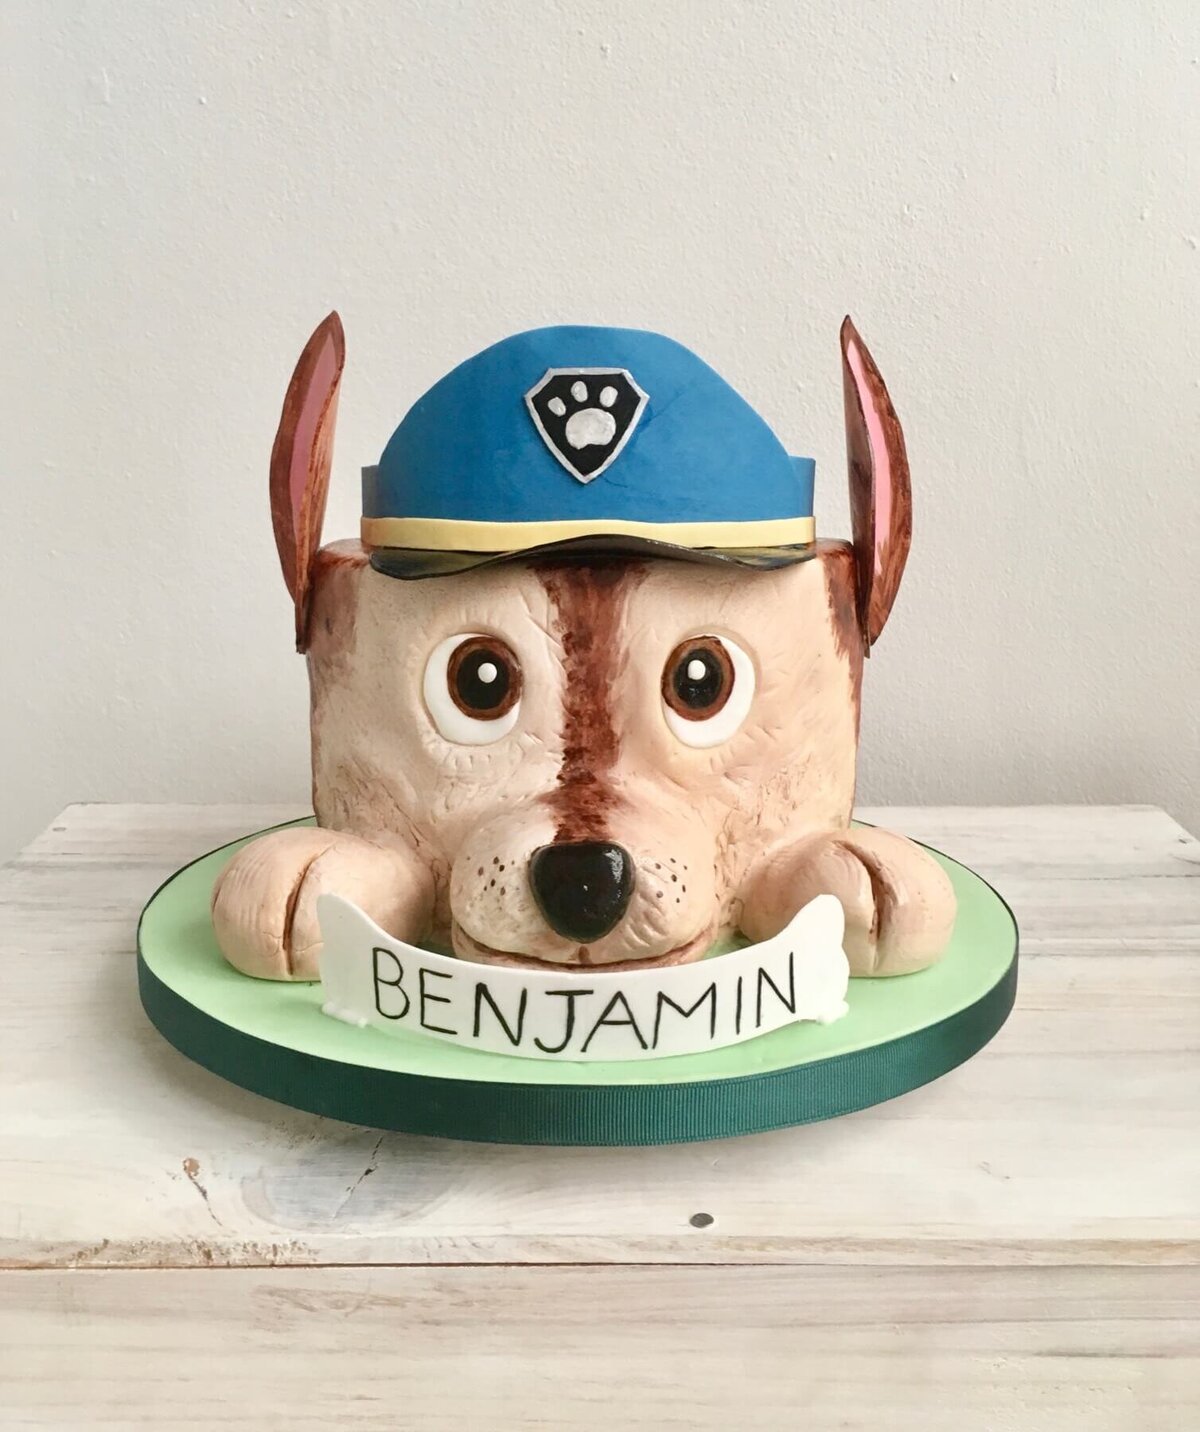 A Paw Patrol birthday cake where the cake looks like a dogs head with two paws